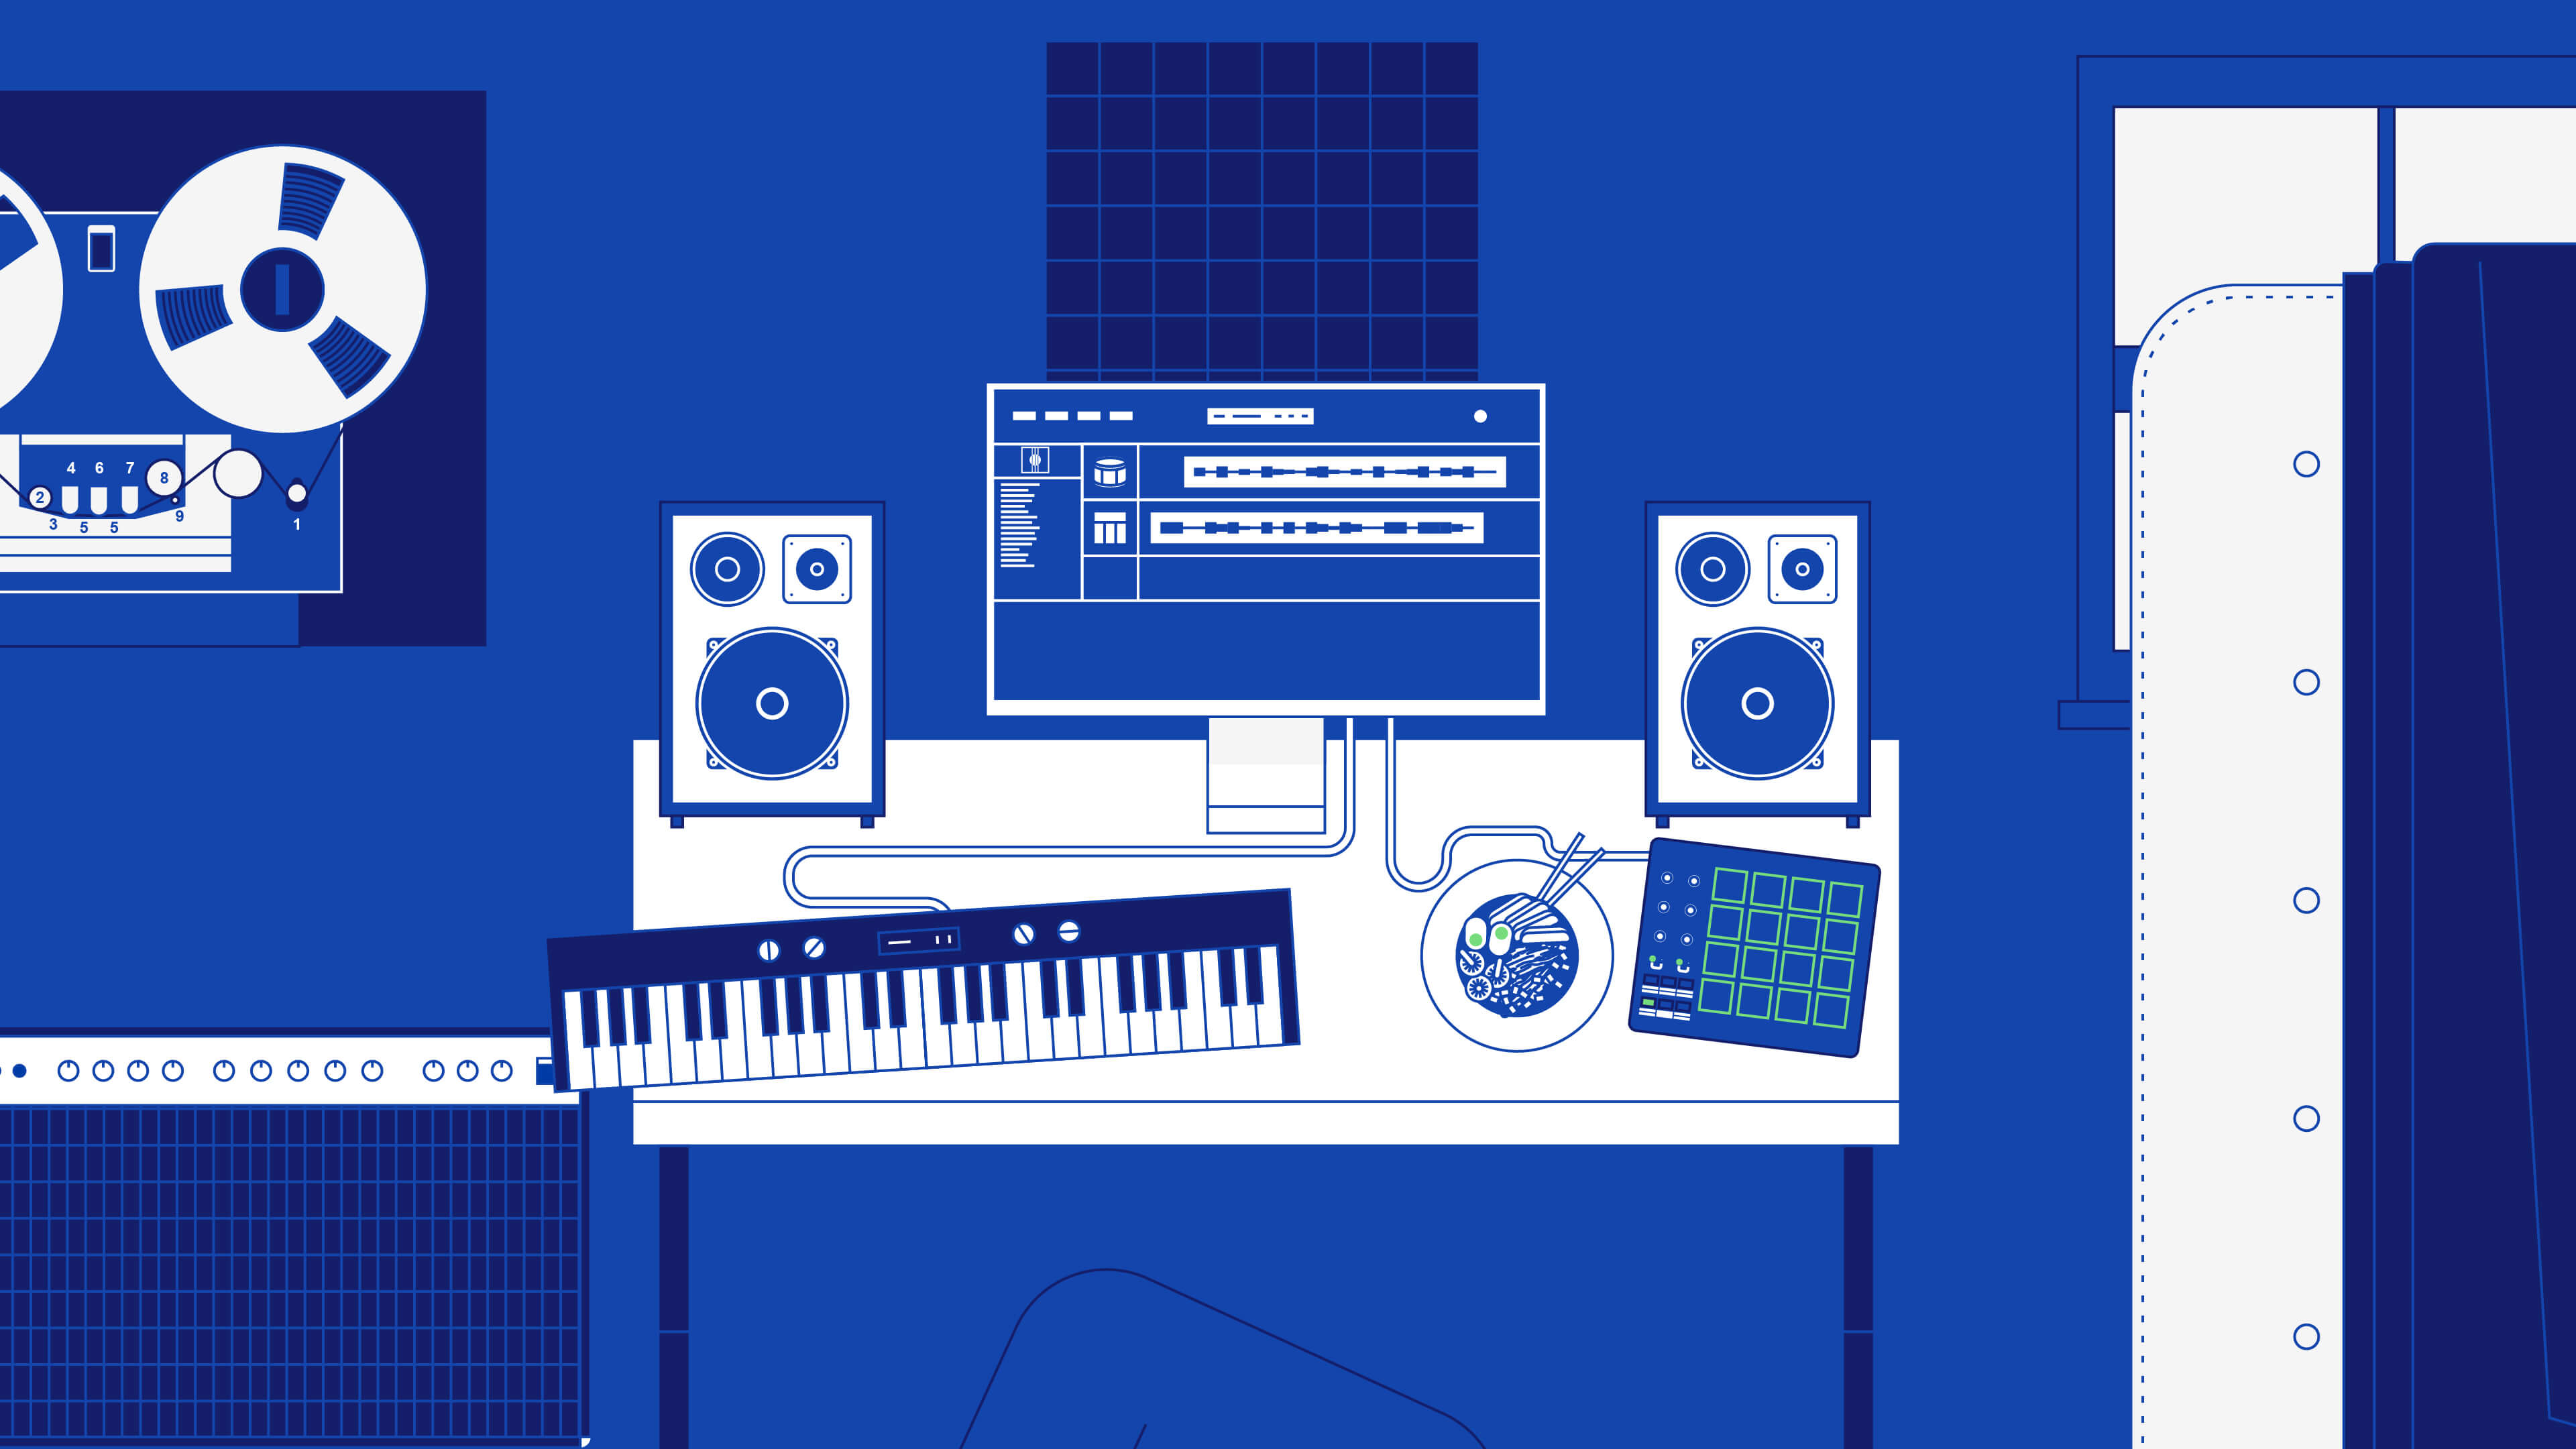 Everything you need to record & produce music at home